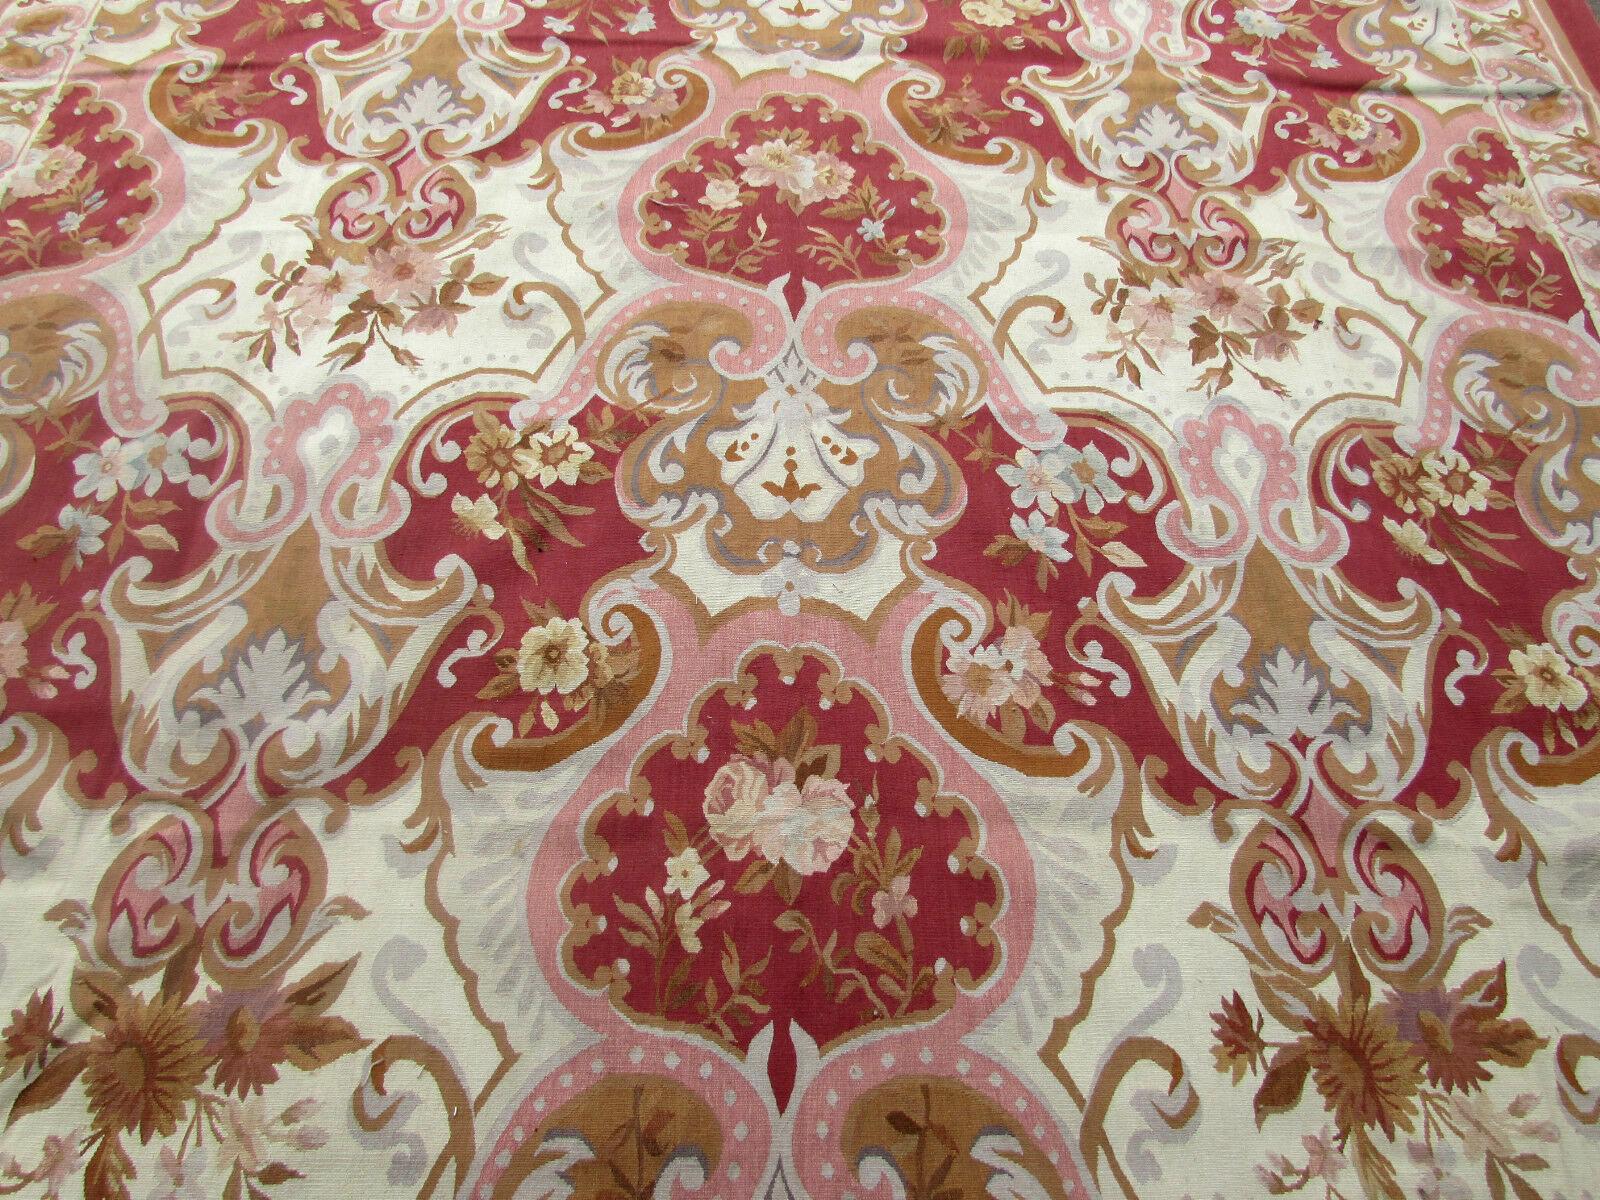 Handmade vintage French Aubusson rug in wool. This rug has been made in the end of the 20th century, it is in original good condition.

- Condition: original good,

- circa 1970s,

- Size: 9.1' x 12.2' (272cm x 366cm),

- Material: